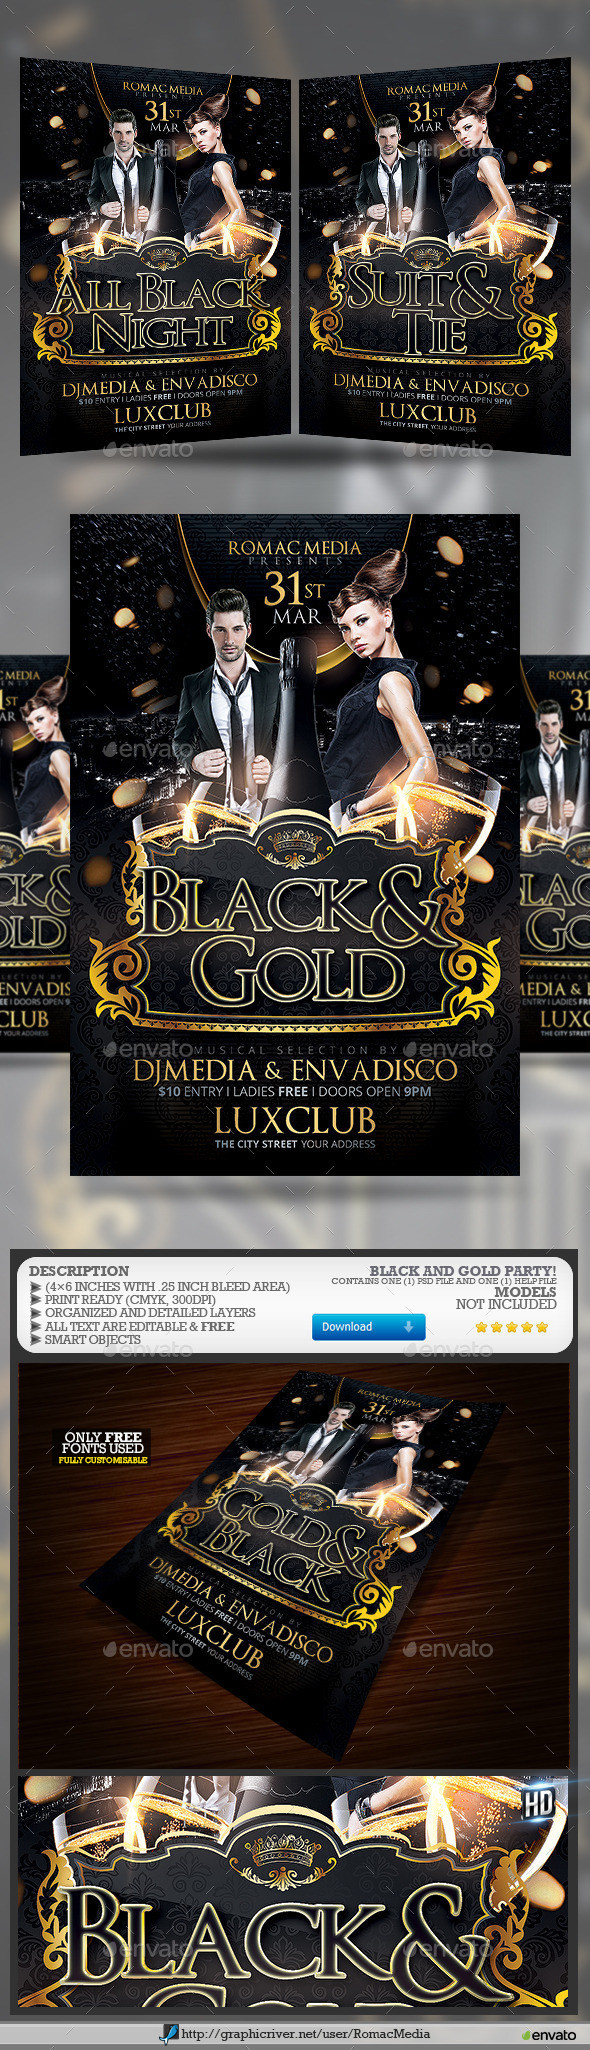 Black 20and 20gold 20party 20flyer 20preview 20image